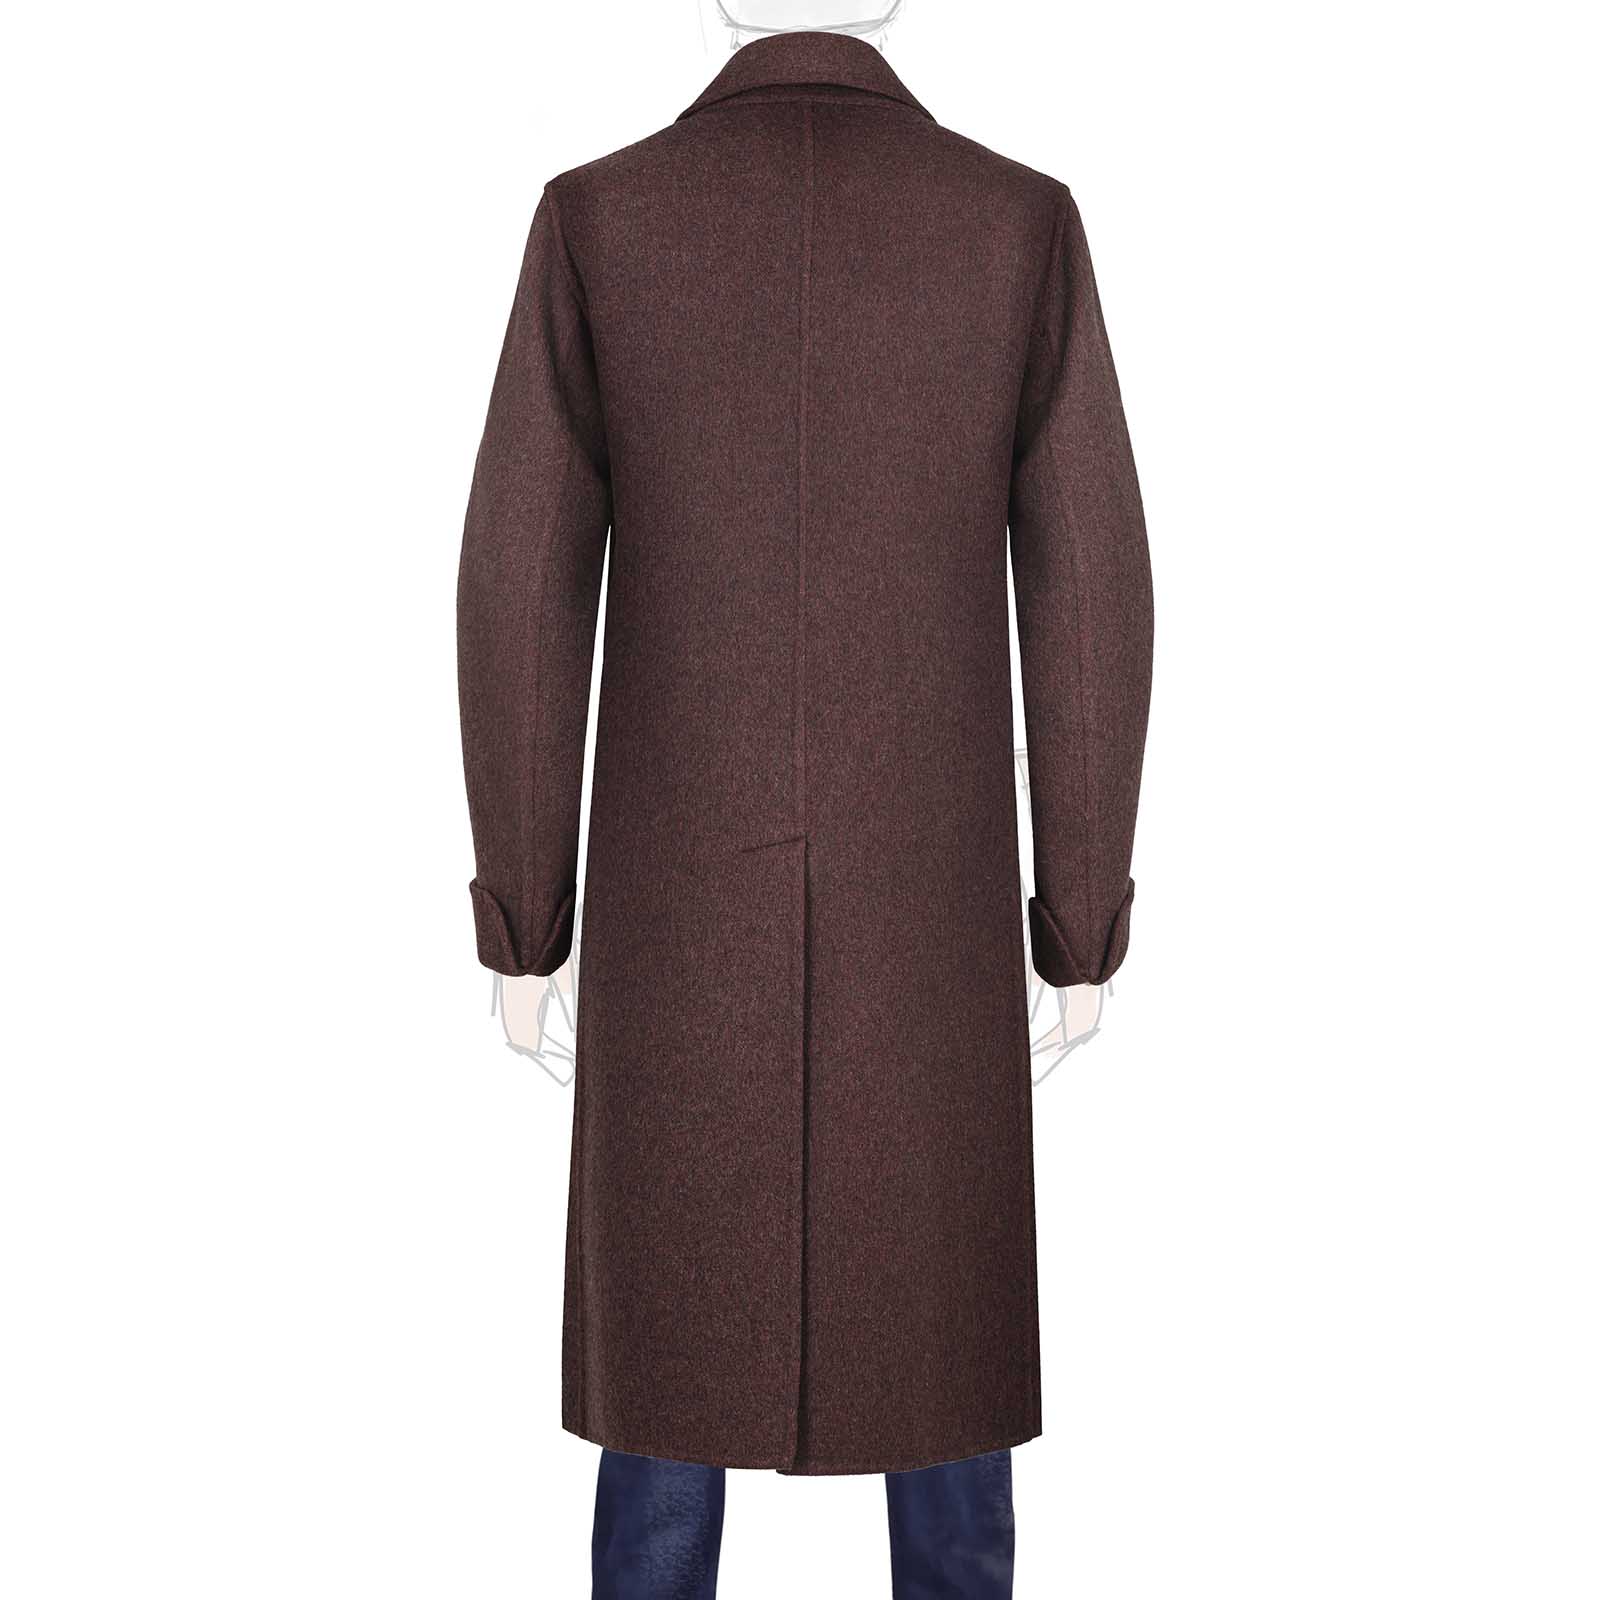 Mariano Rubinacci - Double-breasted coat in burgundy cashmere Limited ...